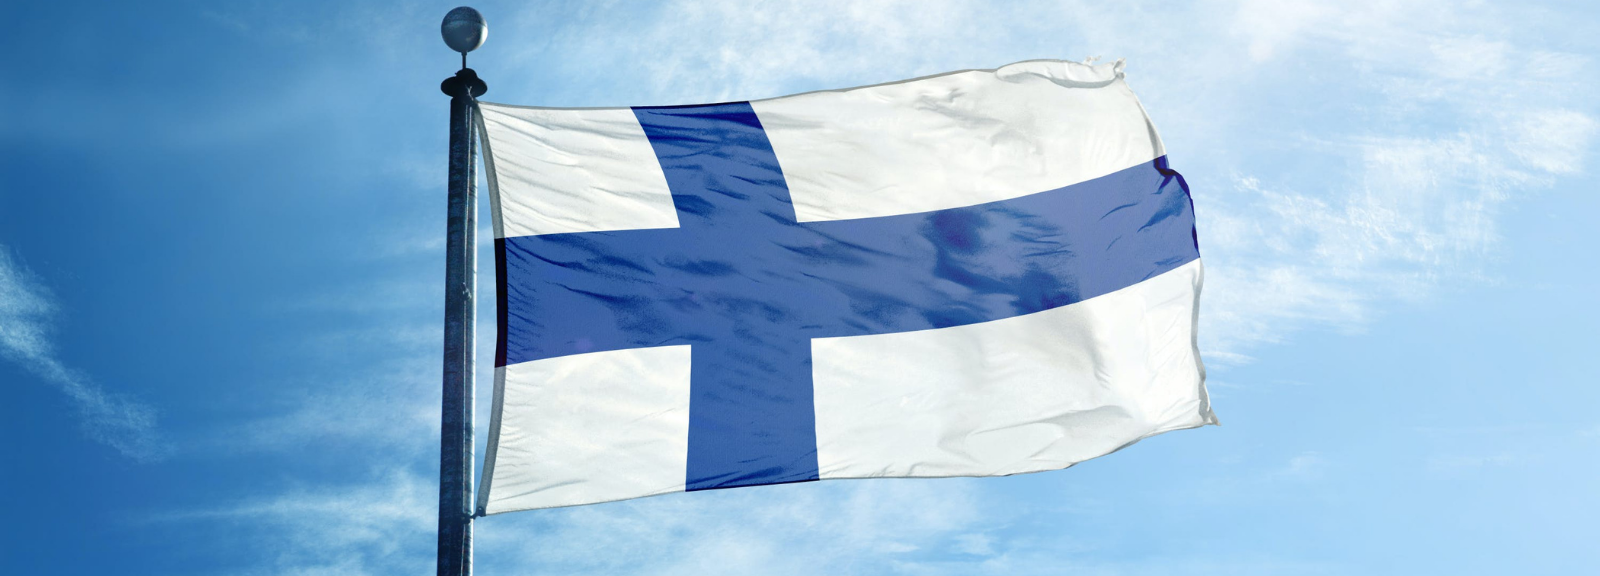 The rear end of a boat on the water with the Finnish flag hanging from the back.